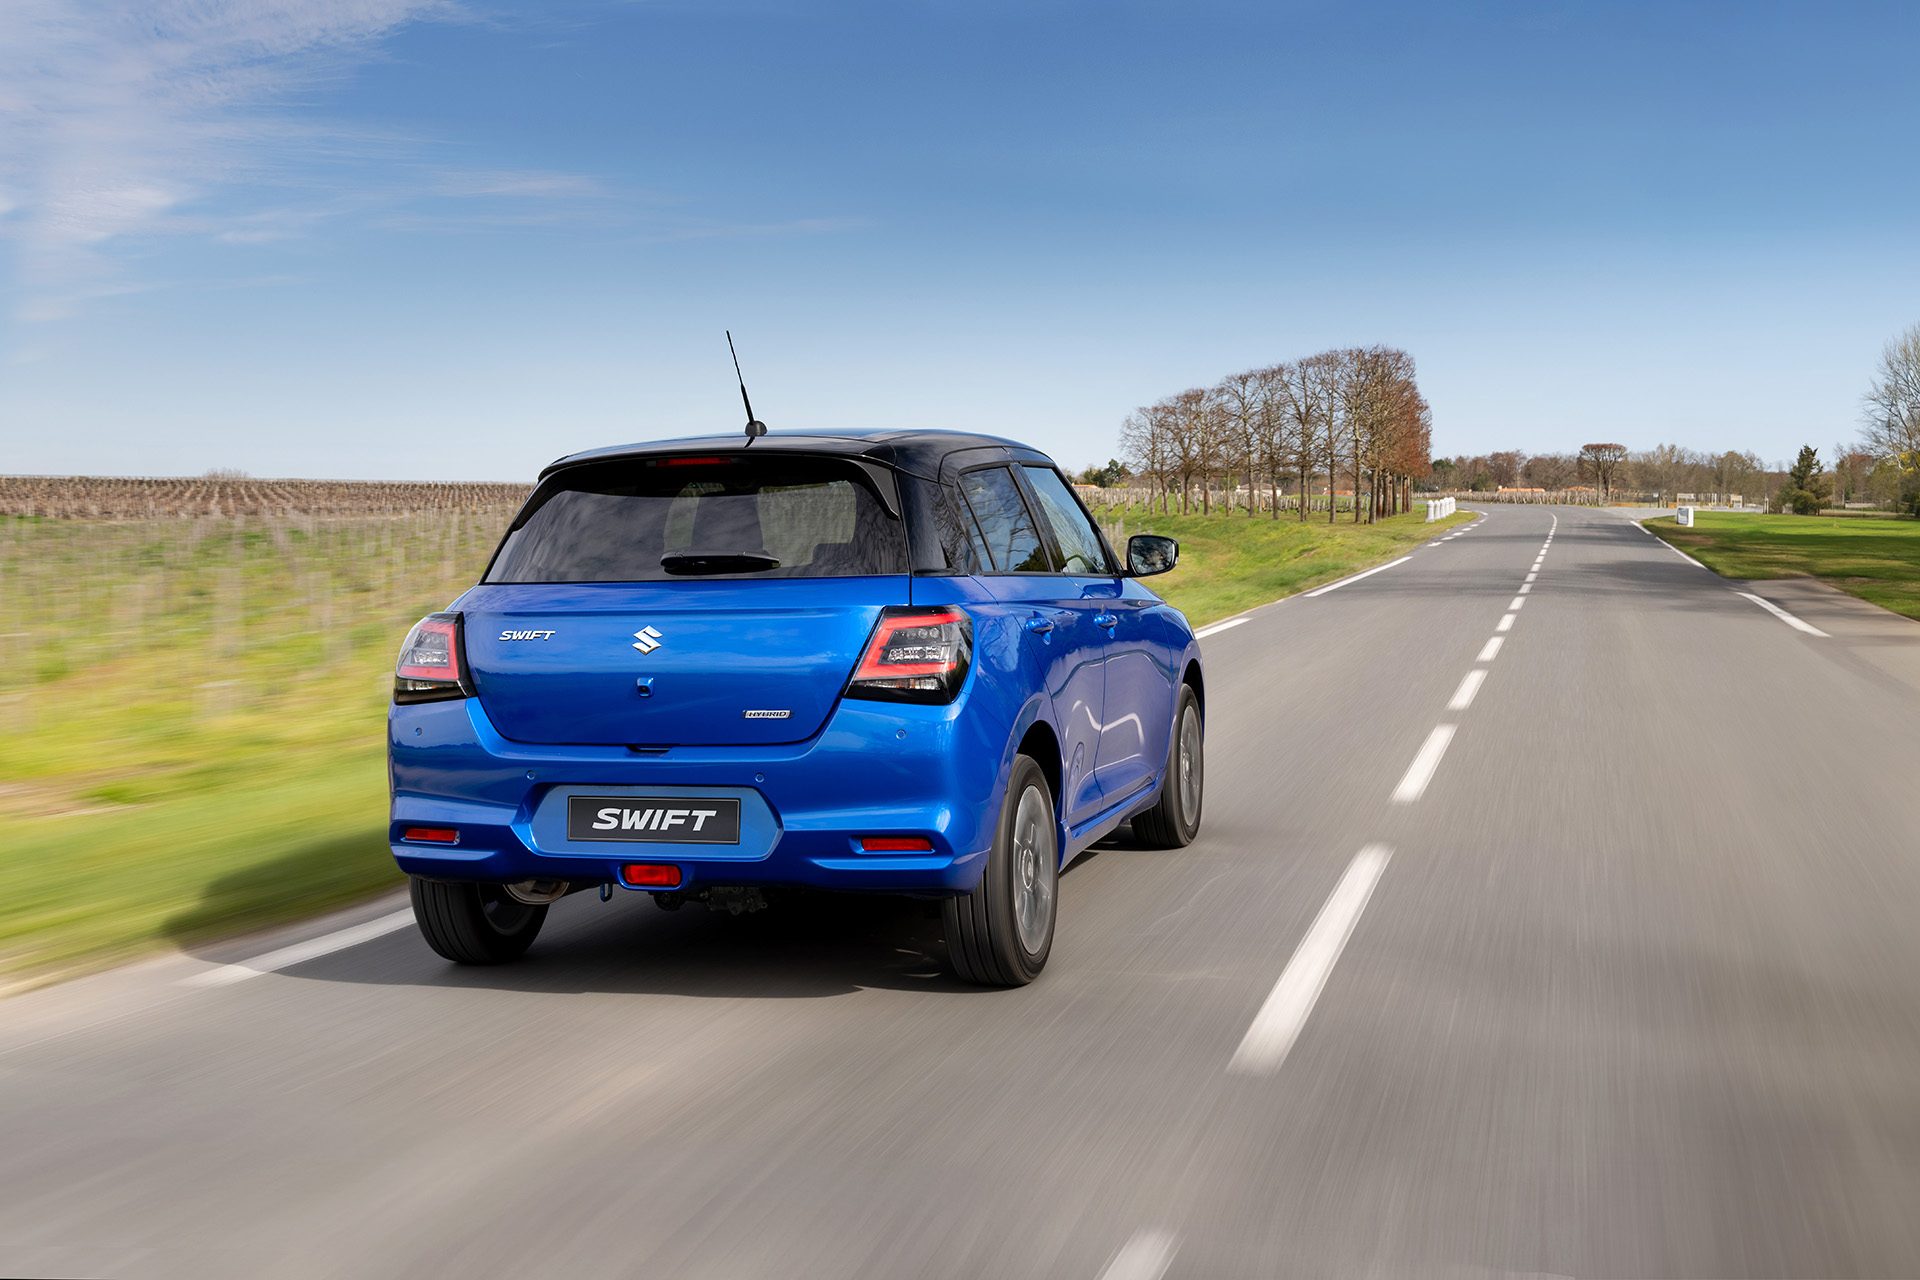 Swift as happy on the open road as plying city streets.